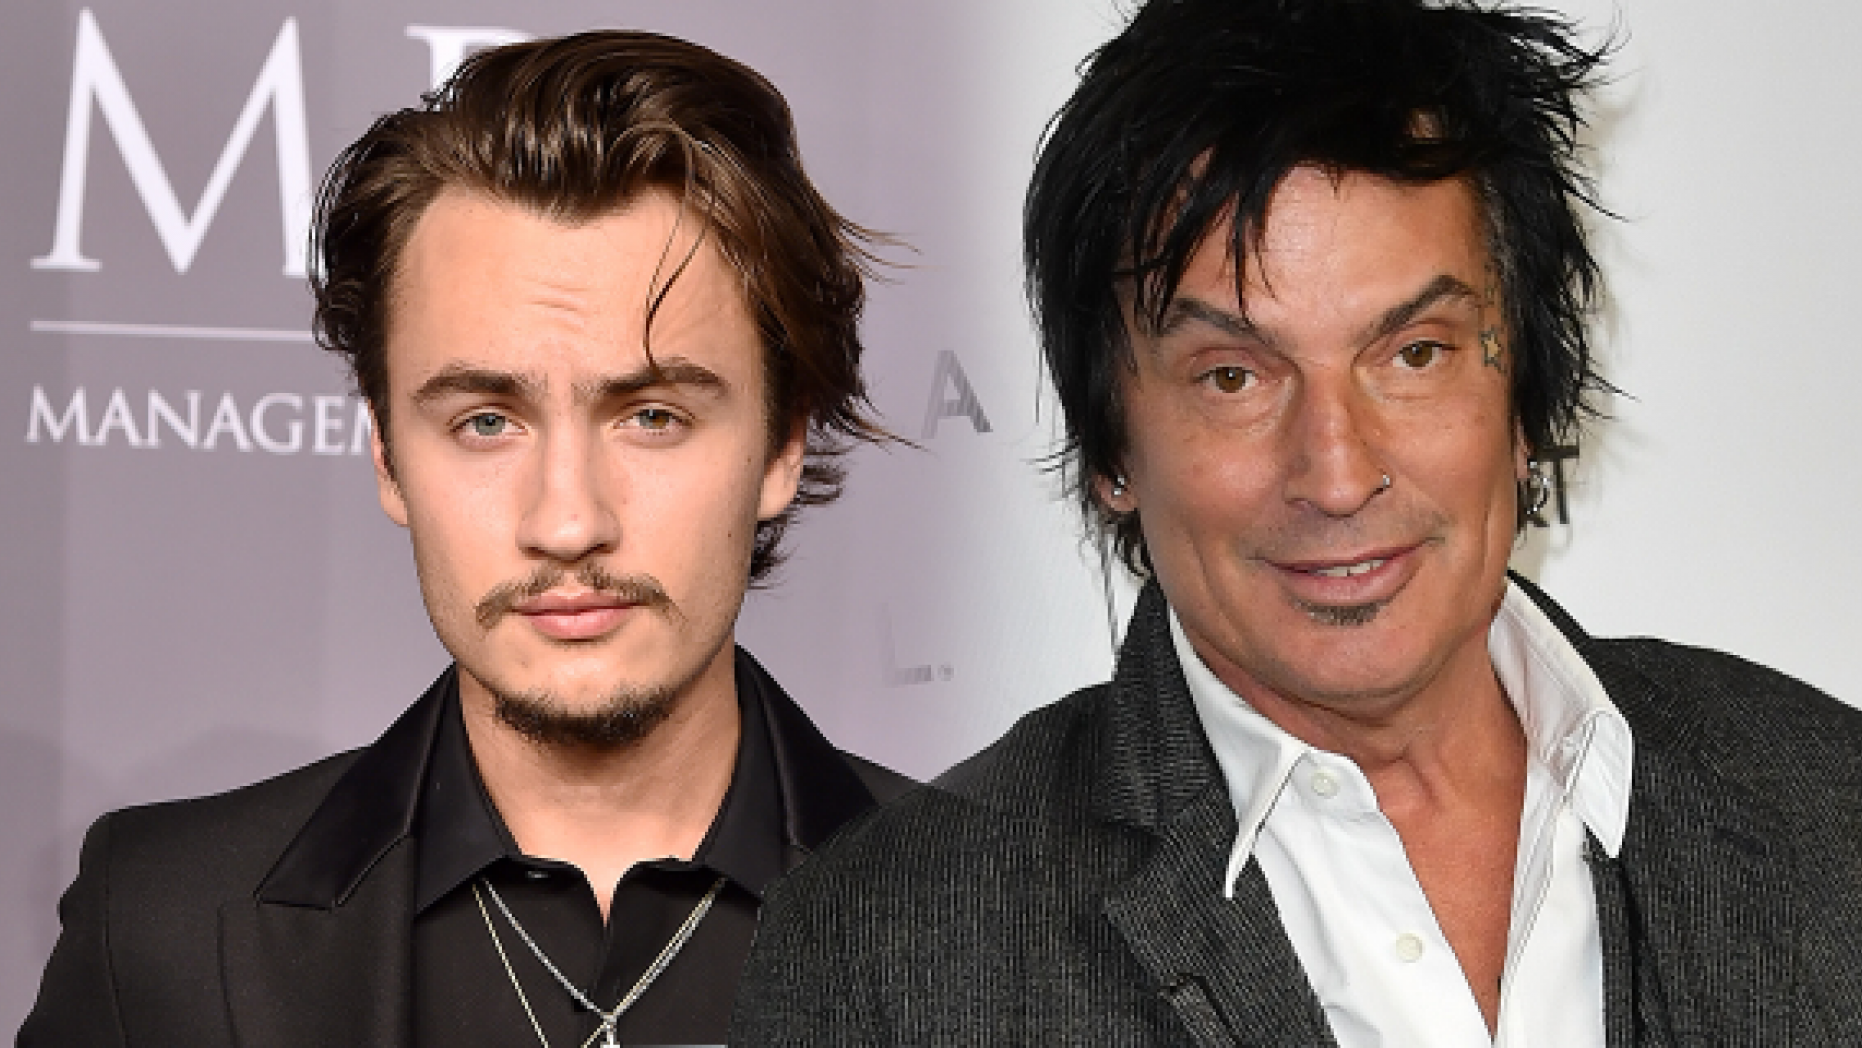 Tommy Lee and his son, Brandon, appear to have made amends following an alleged physical altercation earlier this year.